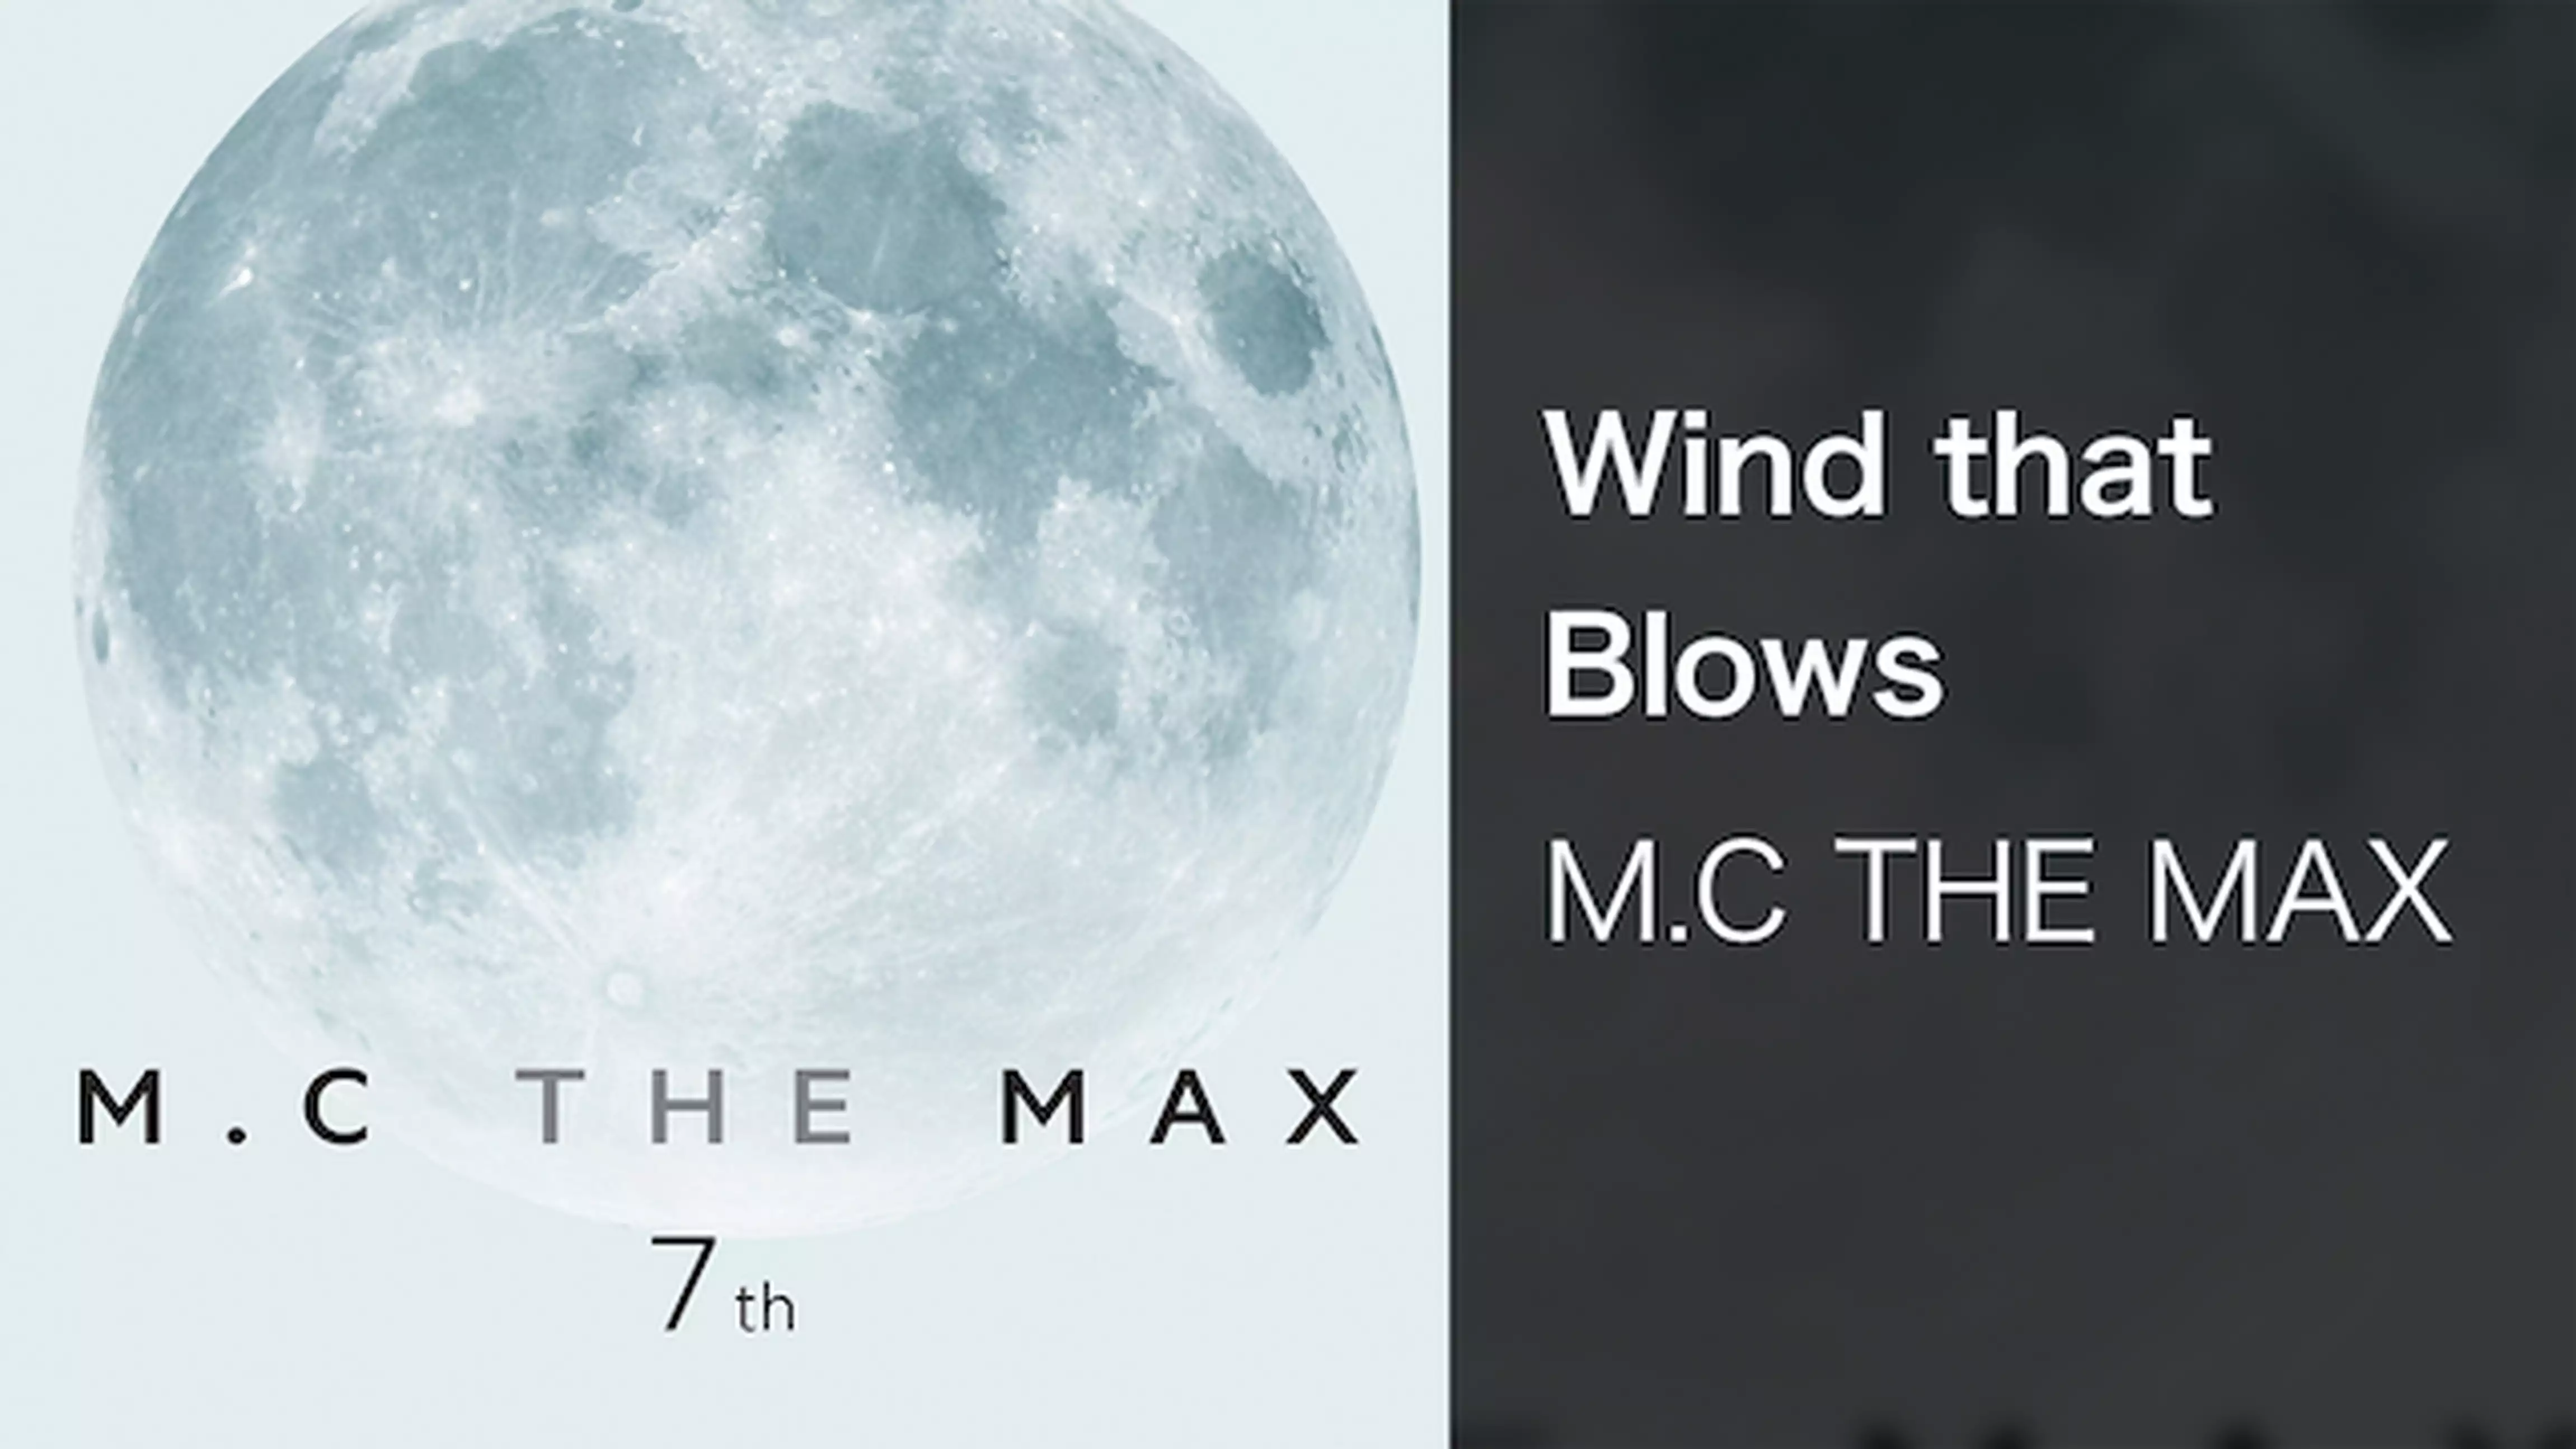 【MV】Wind that Blows/M.C THE MAX